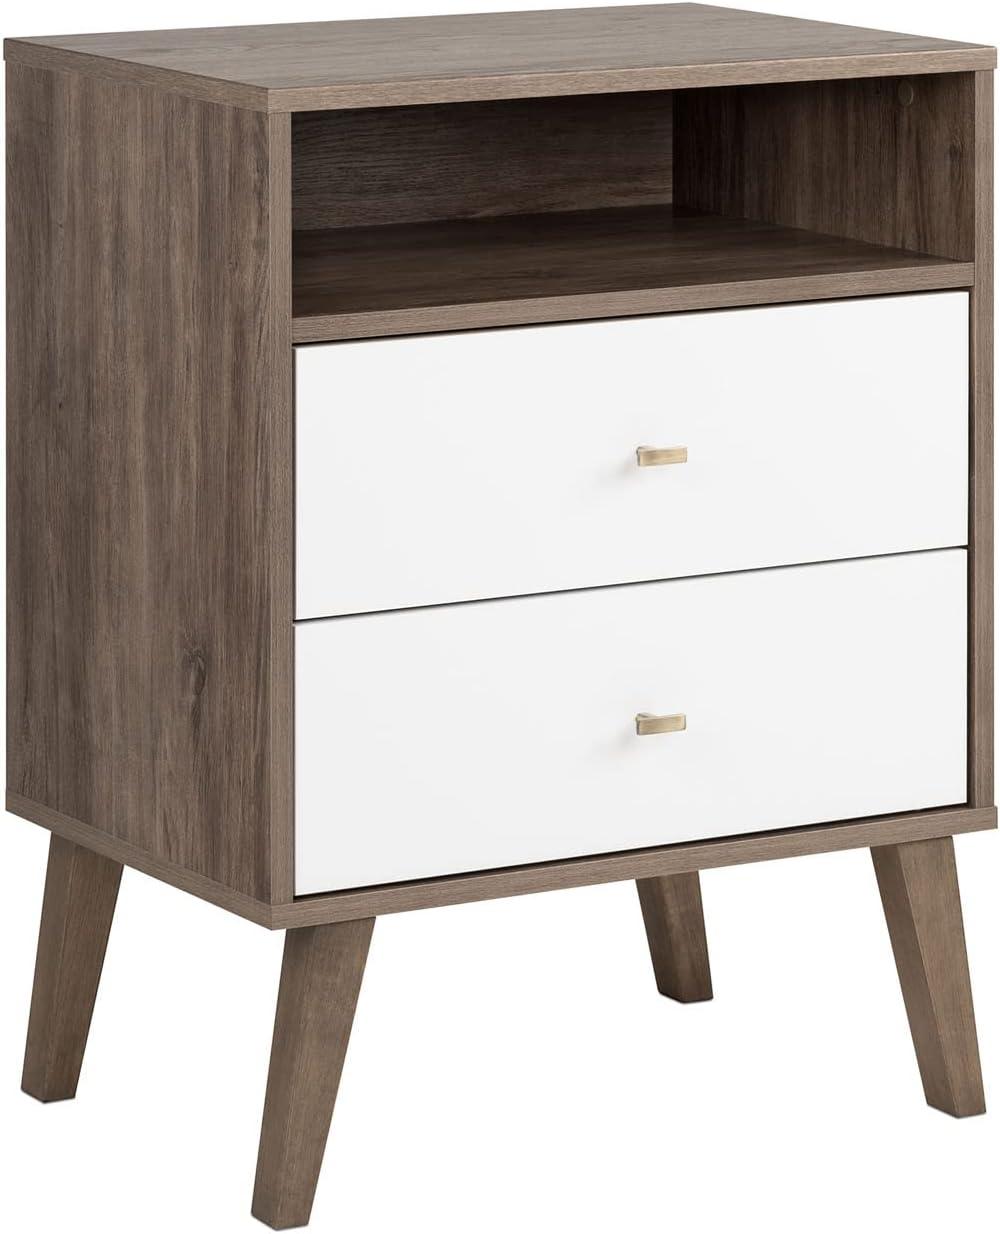 Mid-Century Modern Drifted Gray and White 2-Drawer Nightstand with Shelf